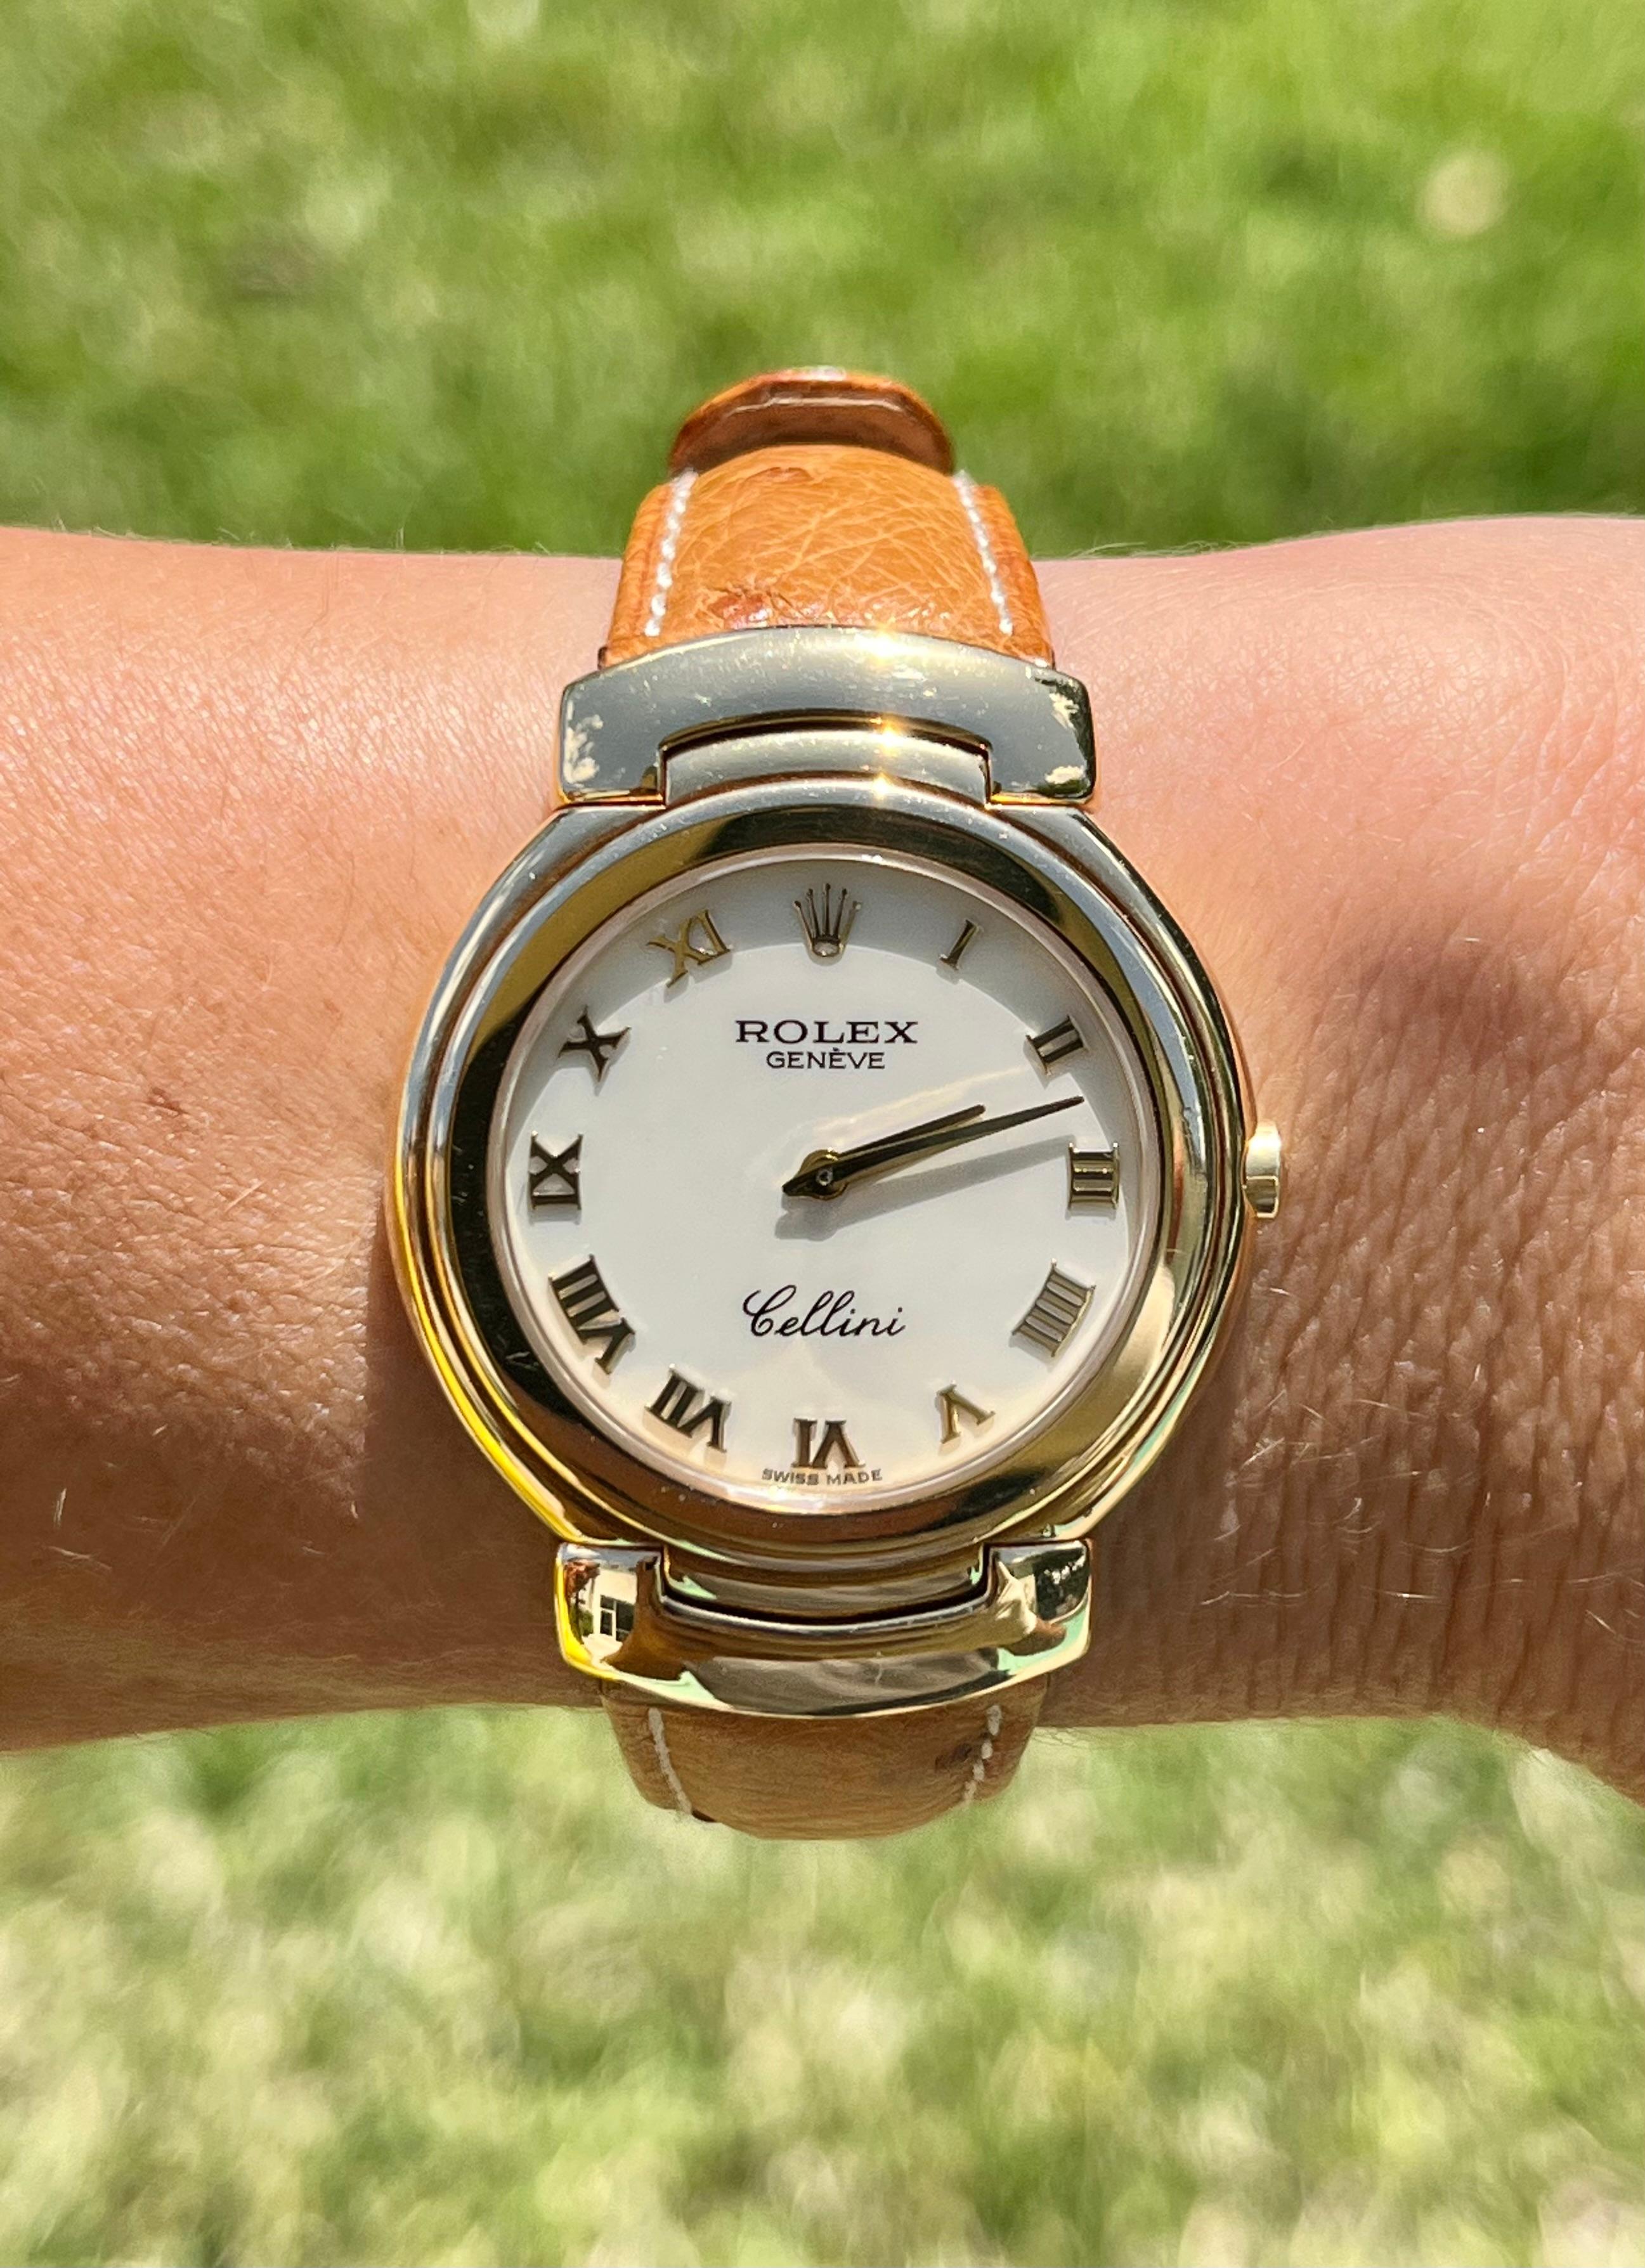 Rolex Ref. 6622 Cellini in 18k Gold Ladies Watch with Brown Leather Strap 2